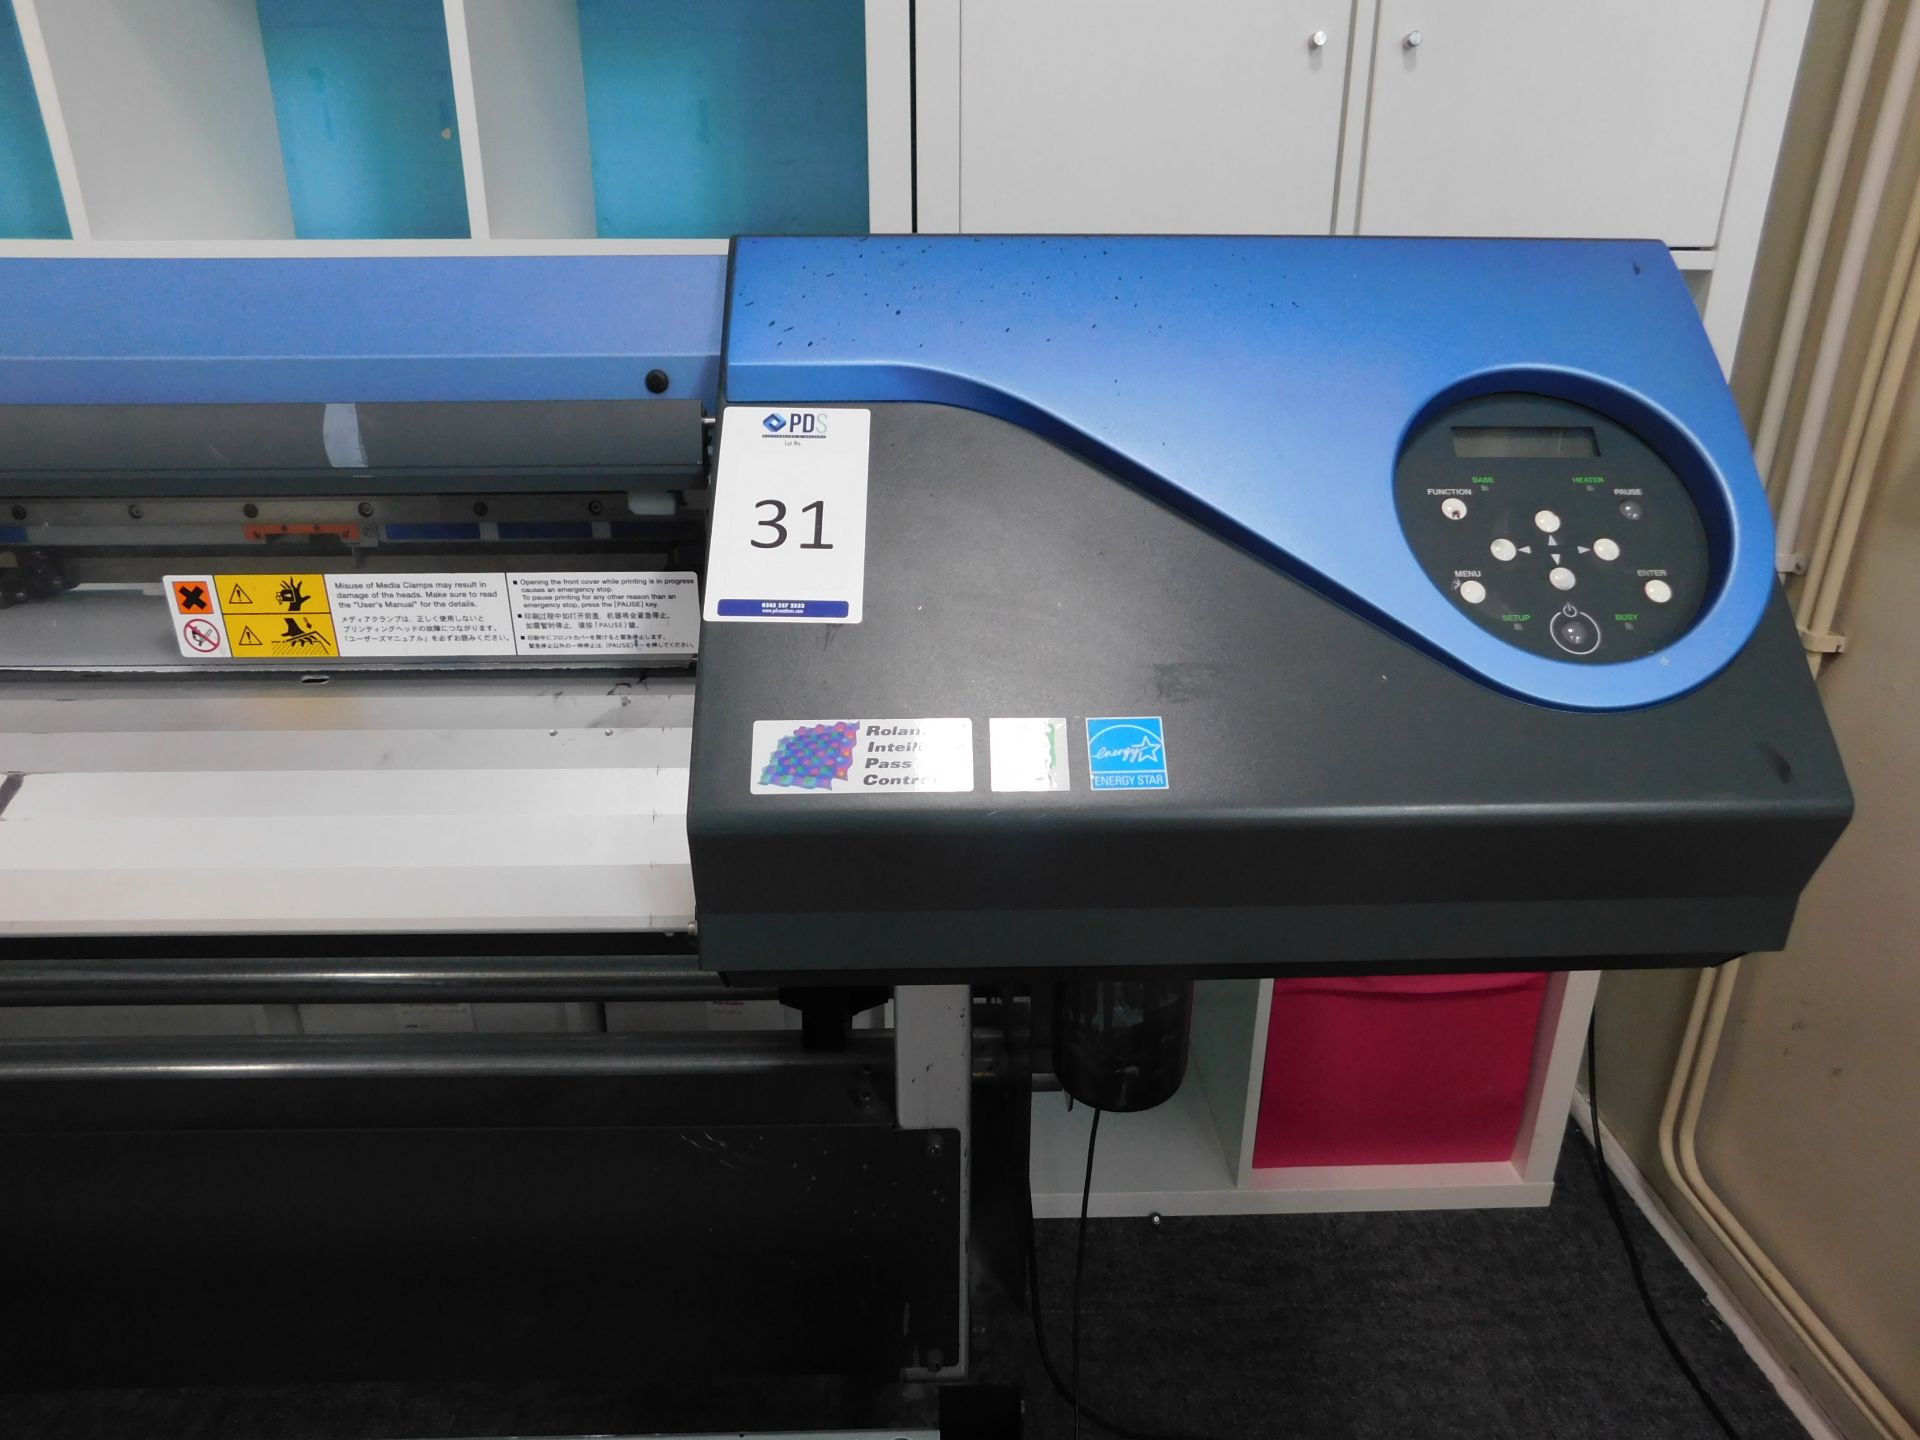 Roland VersaCamm VS640 Wide Format Printer/Cutter Serial Number ZZ50971 (Location: Hatfield - See - Image 2 of 3